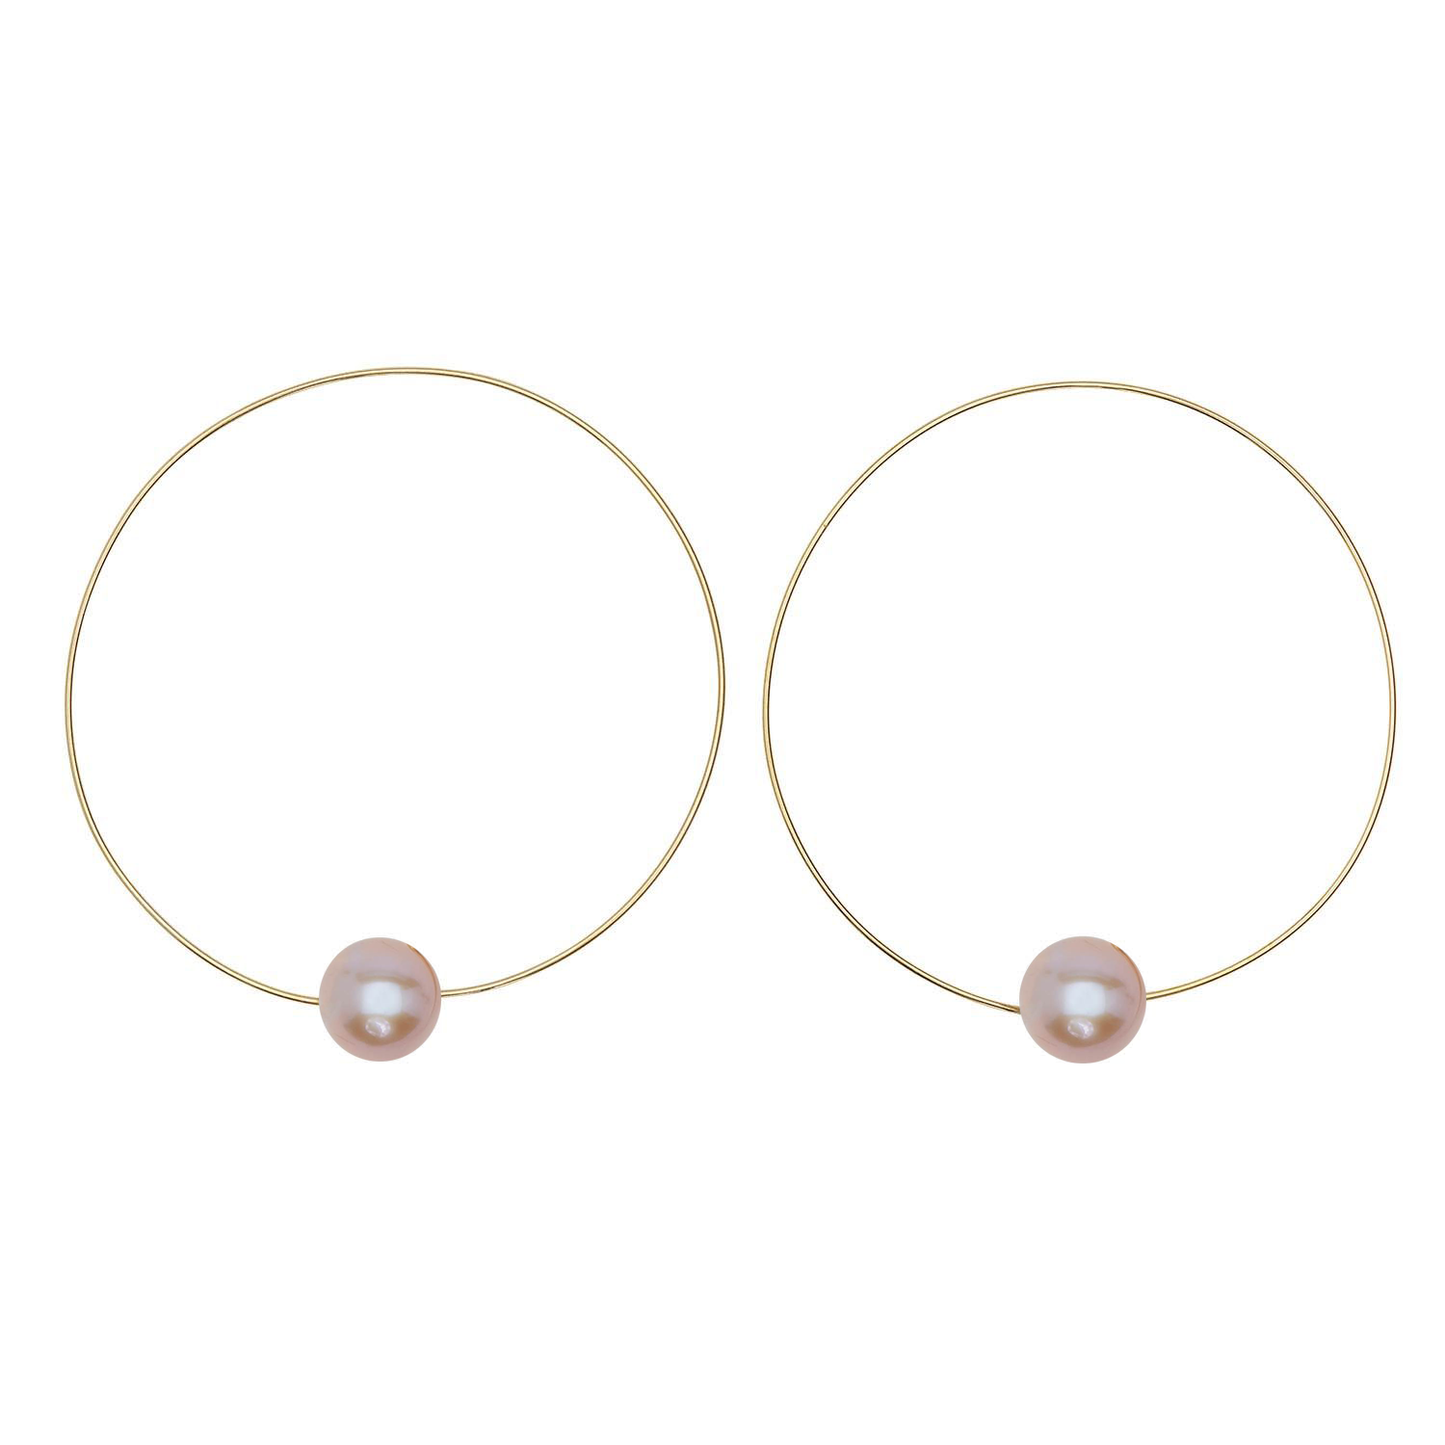 Medium Round Grey Hoops with Round Freshwater Pearls